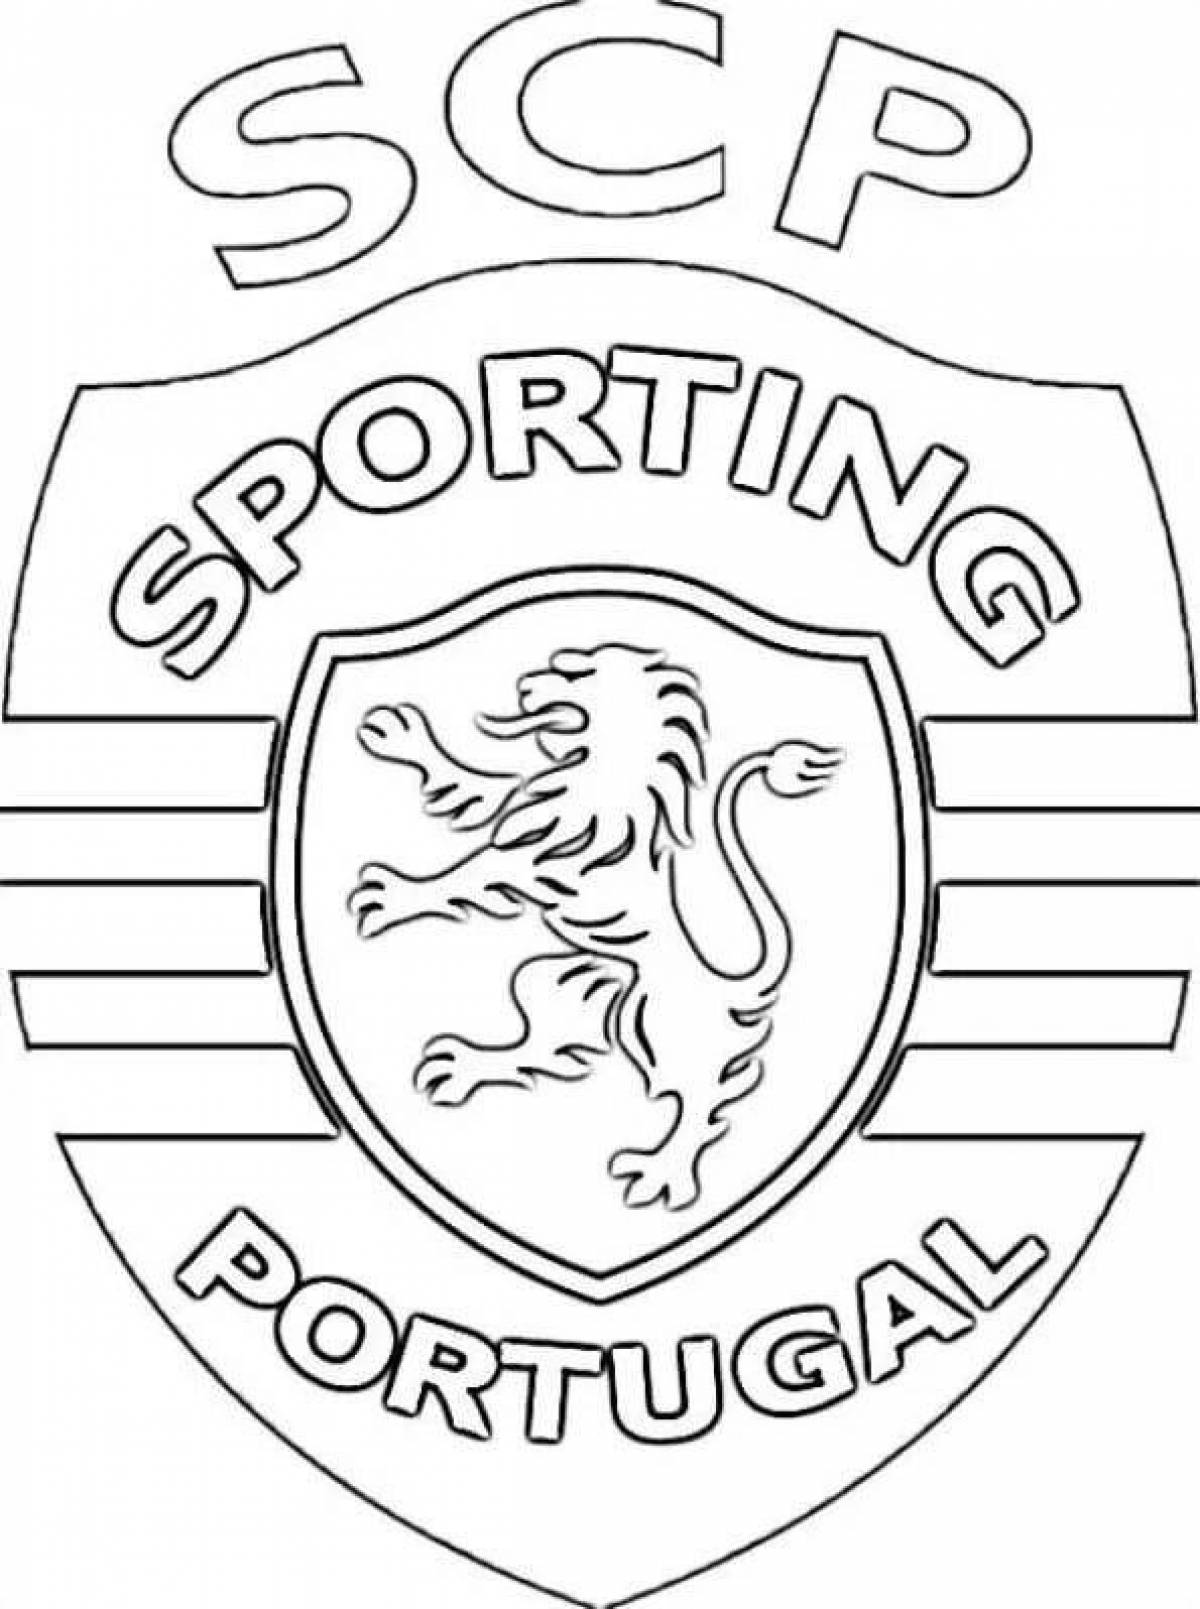 Impressive coloring of the emblem of football clubs